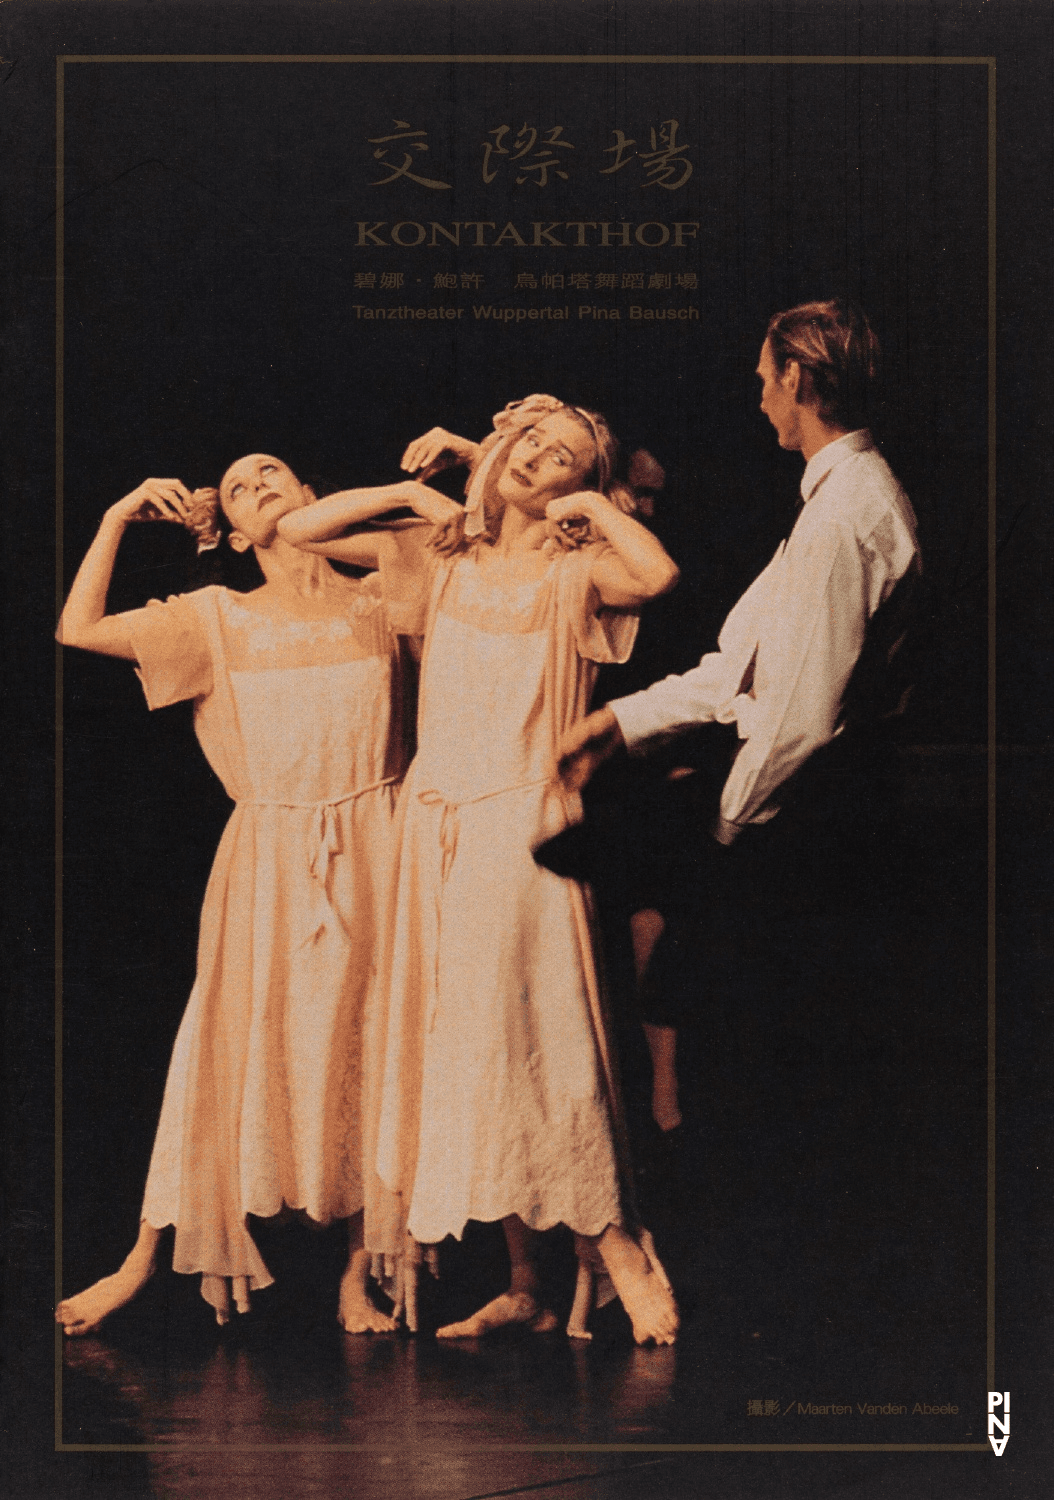 Booklet for “Kontakthof” by Pina Bausch with Tanztheater Wuppertal in in Taipei, 03/23/2001 – 03/25/2001